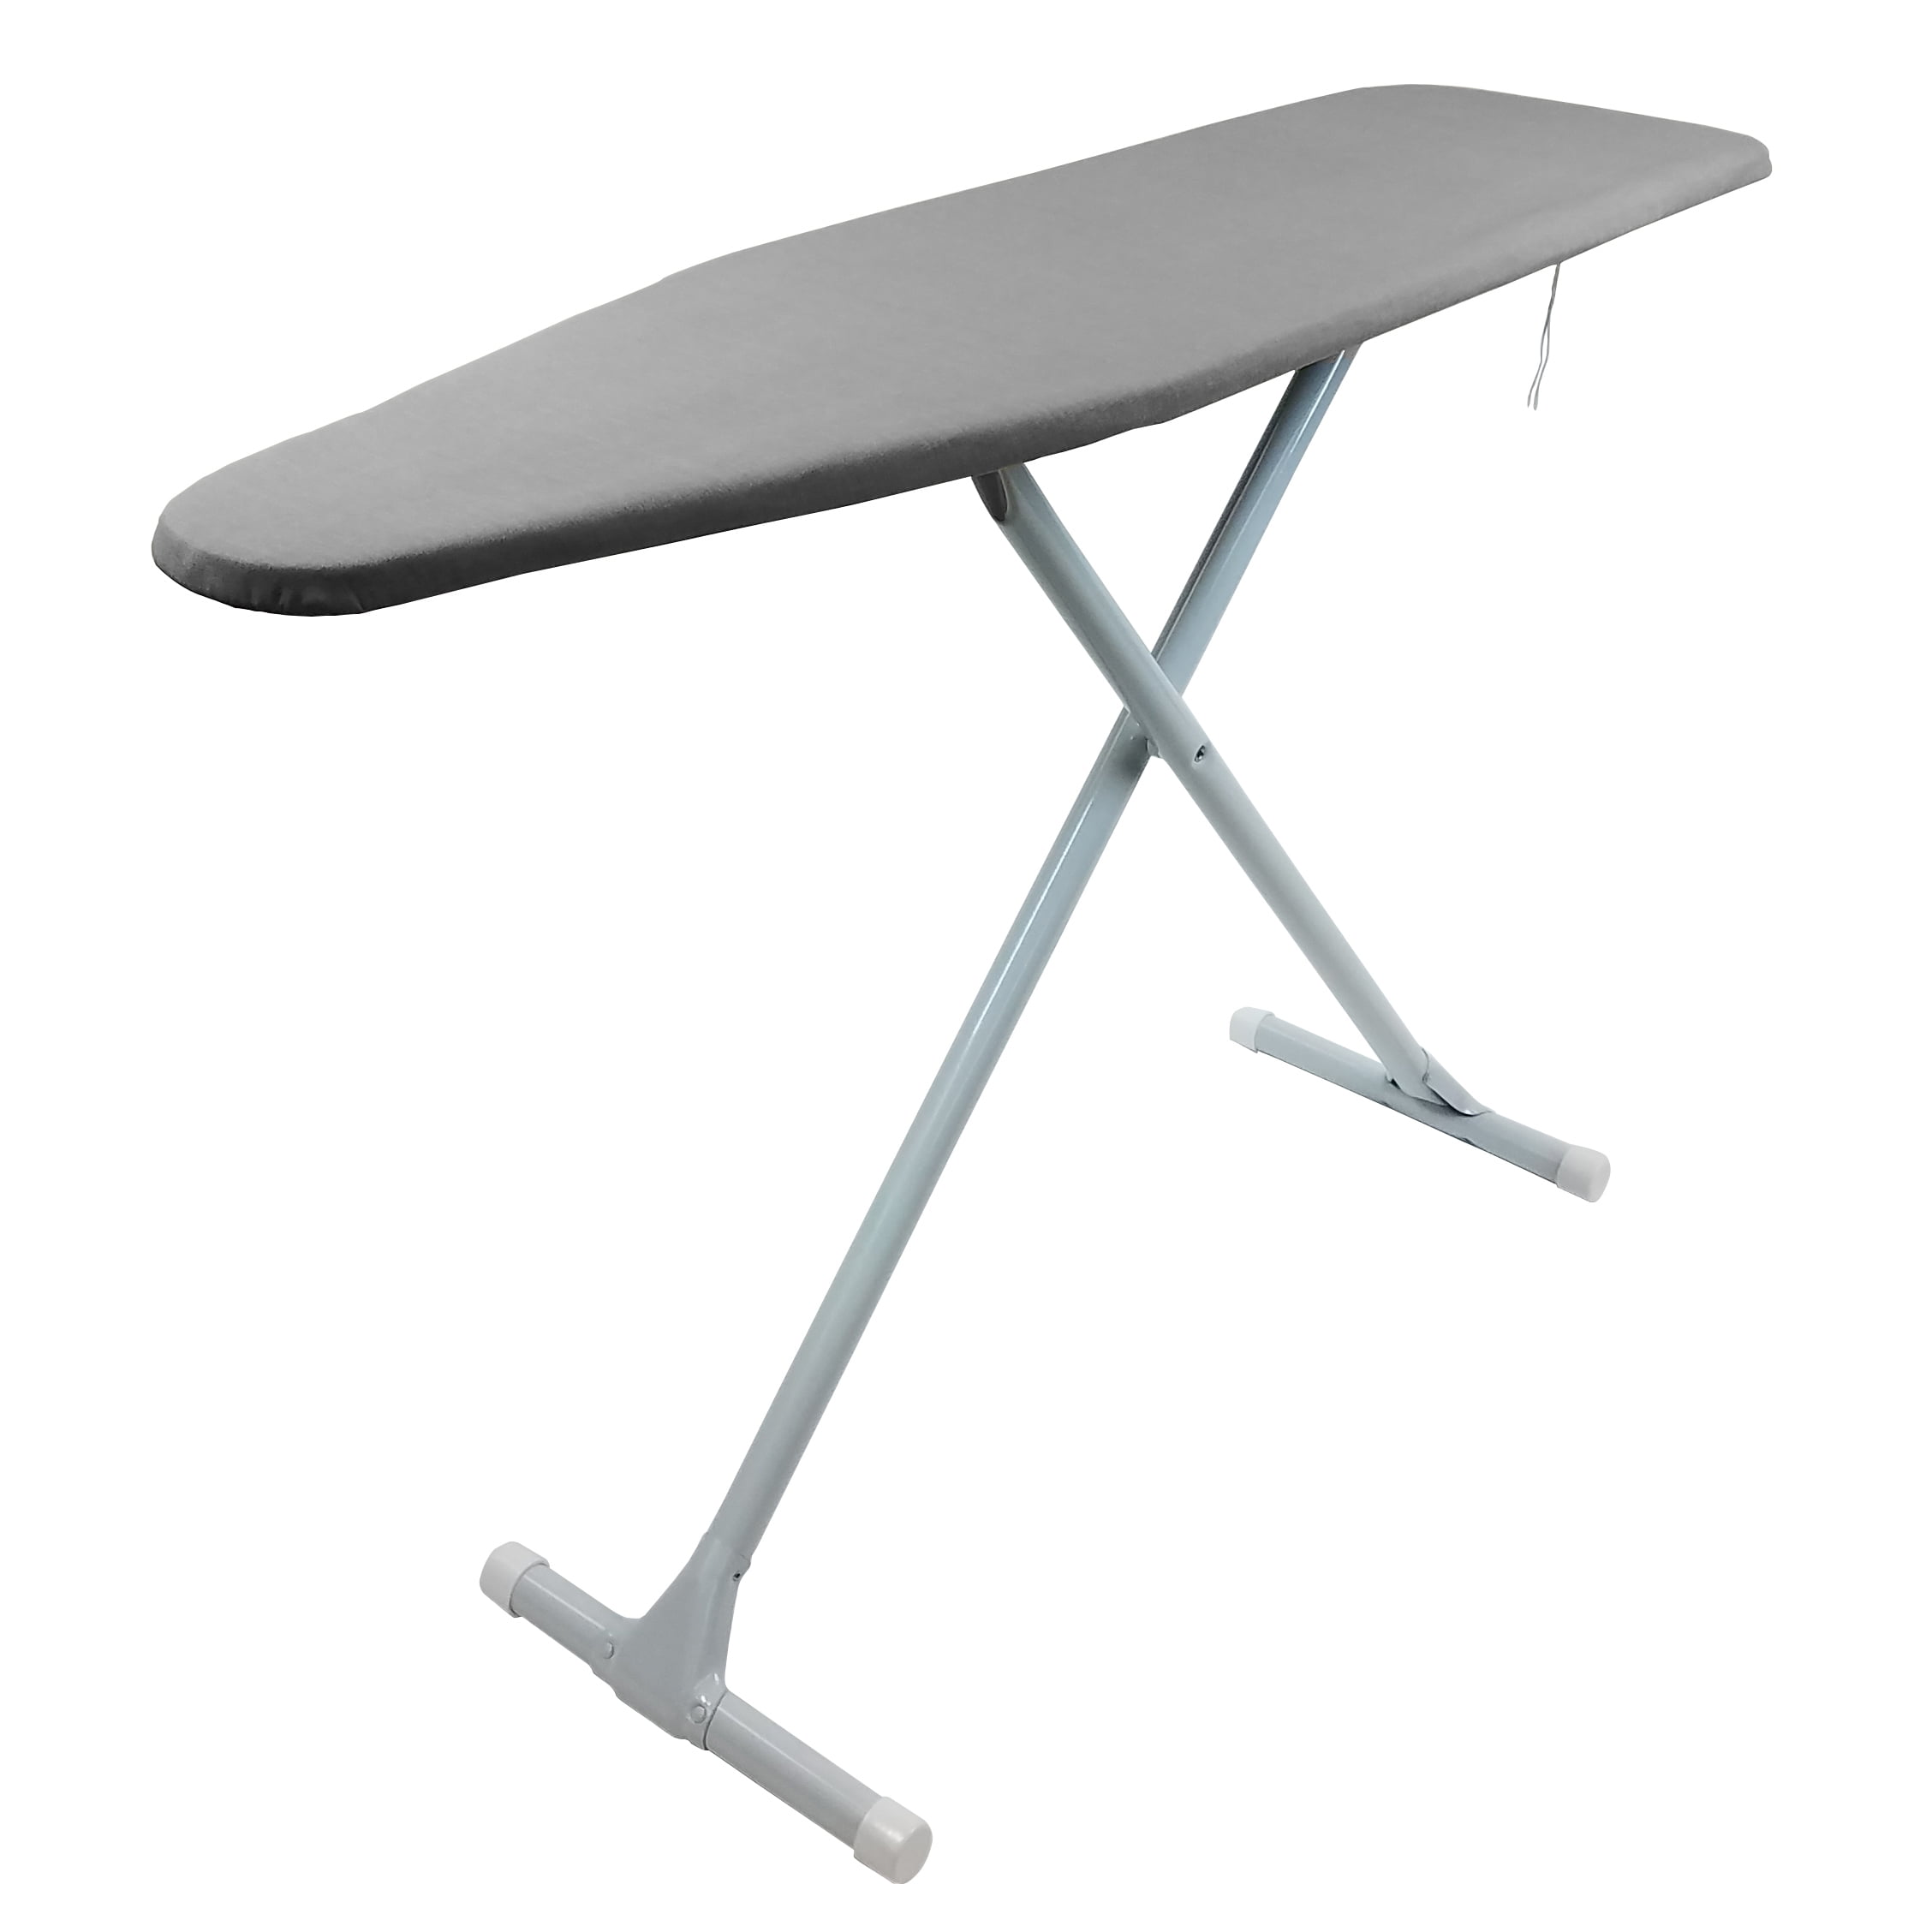 Homz 4740044 4-Leg Table Top Ironing Board With Blue Lattice Cover for sale online 